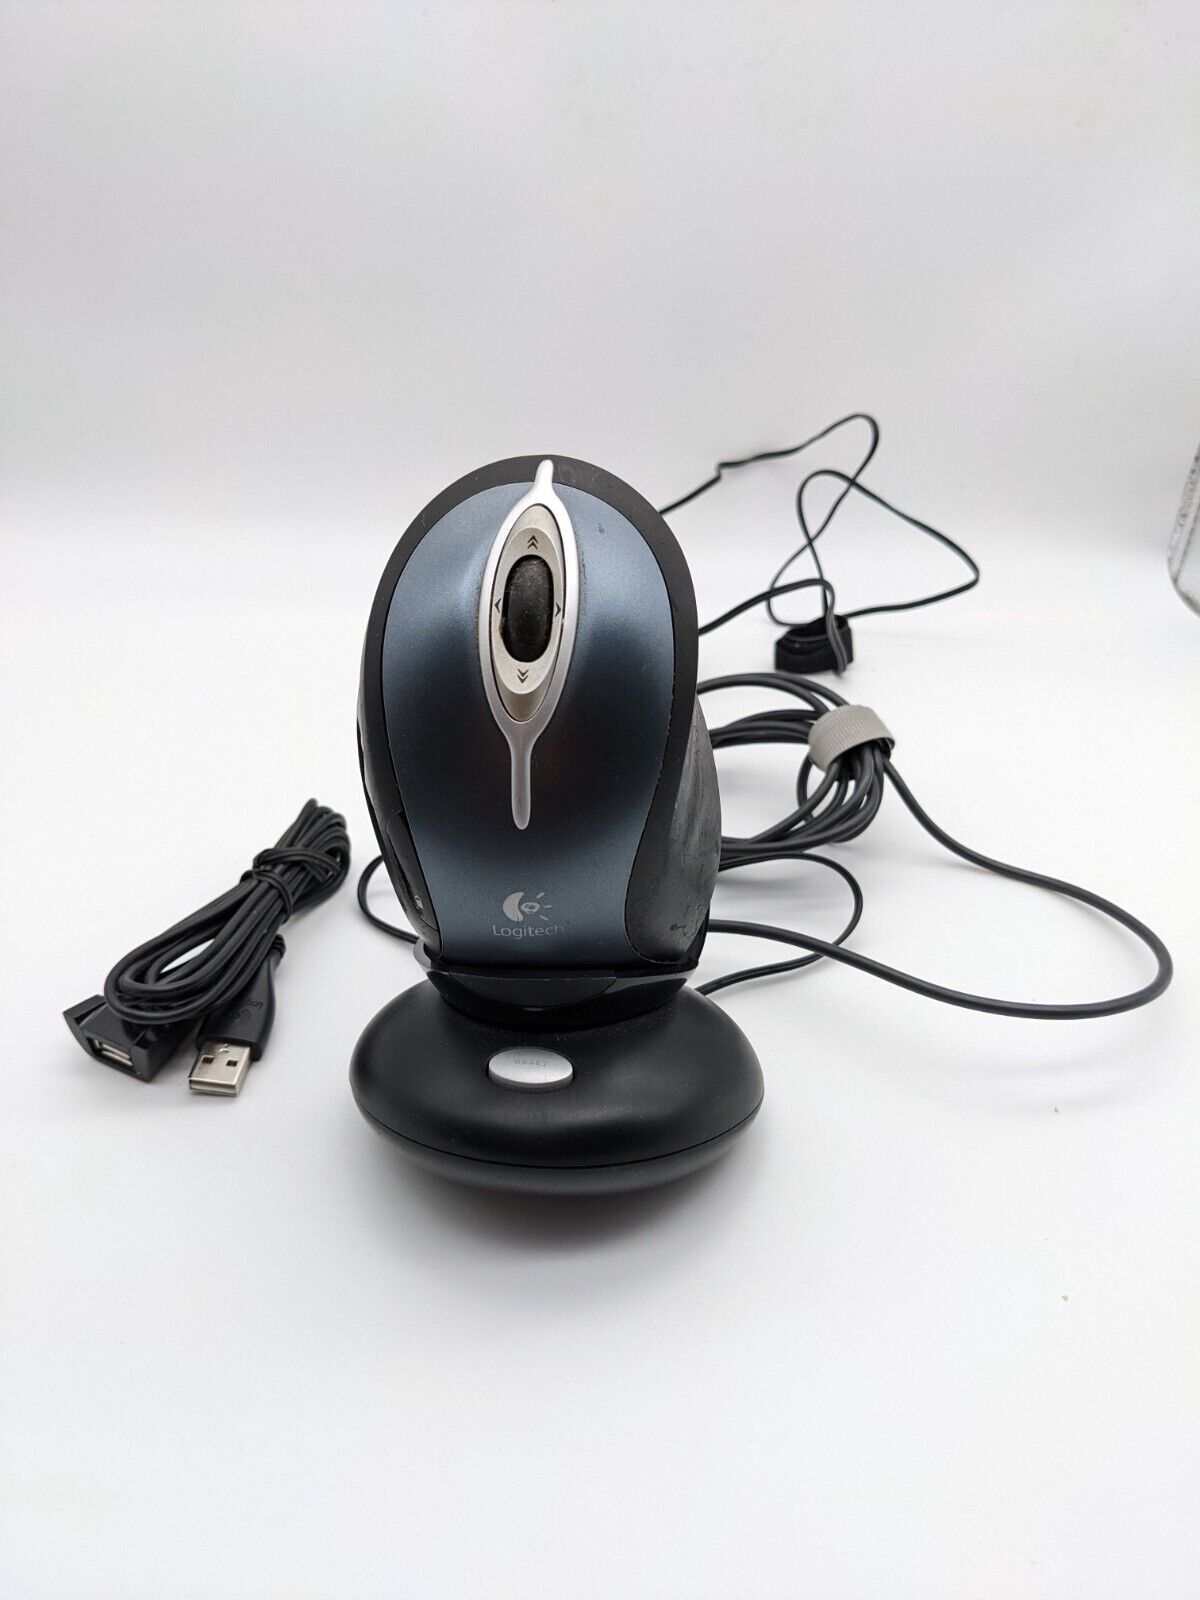 Logitech MX1000 Wireless Laser Mouse M-RAG97 & Receiver/Charger Dock+AC Adapter